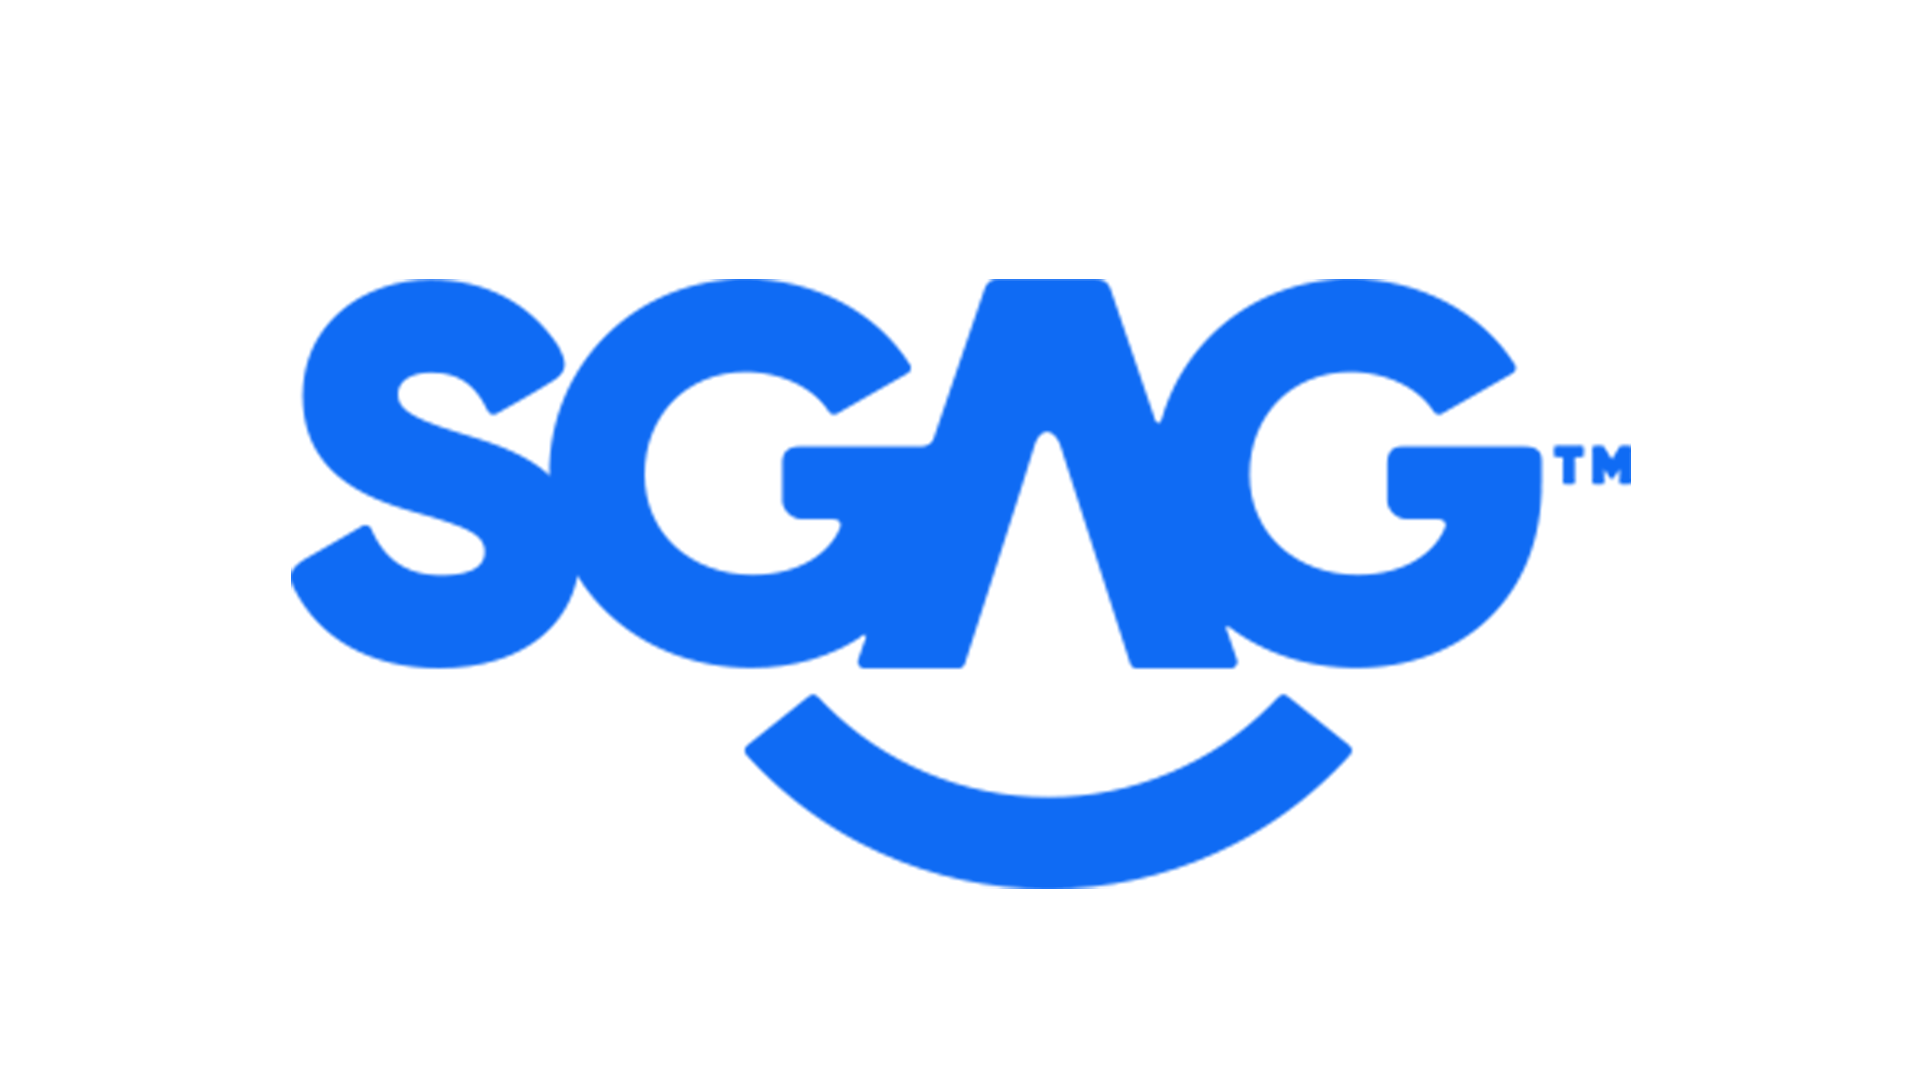 SGAG is one of Singapore's most popular social media accounts.